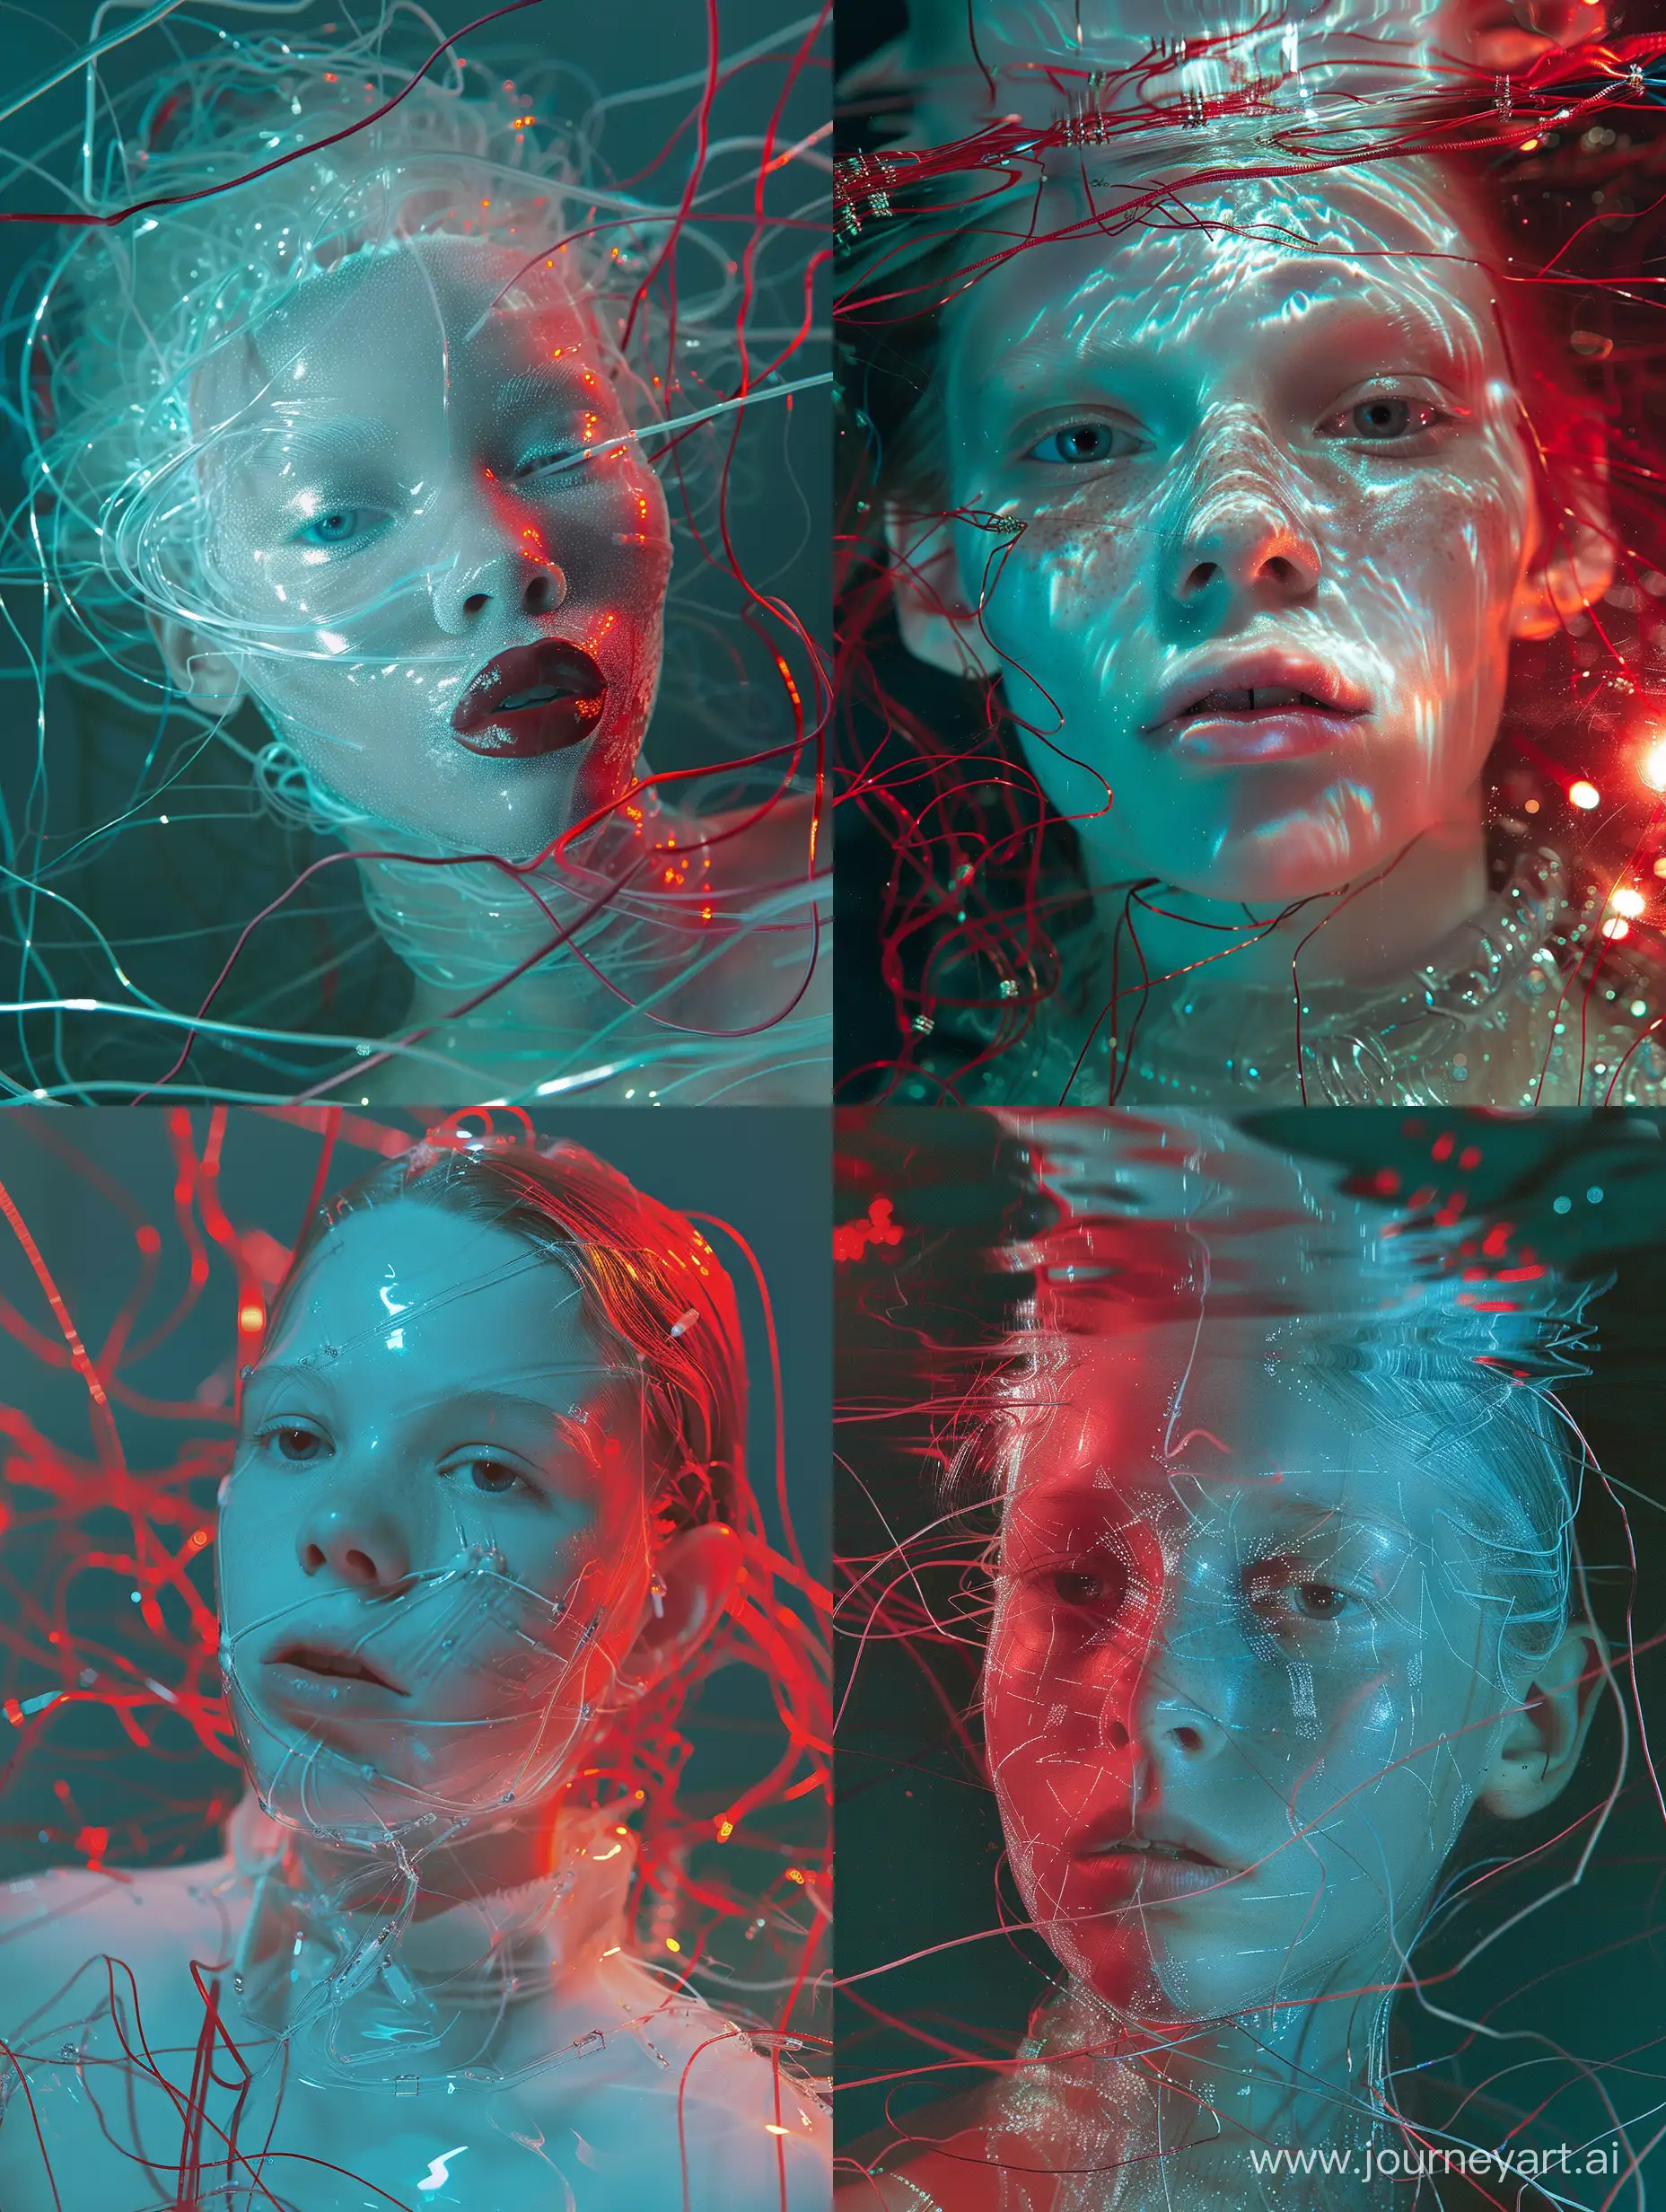 Ethereal-Young-Woman-Immersed-in-a-Sea-of-Wires-Tim-Walkers-HauteCouture-Portrait